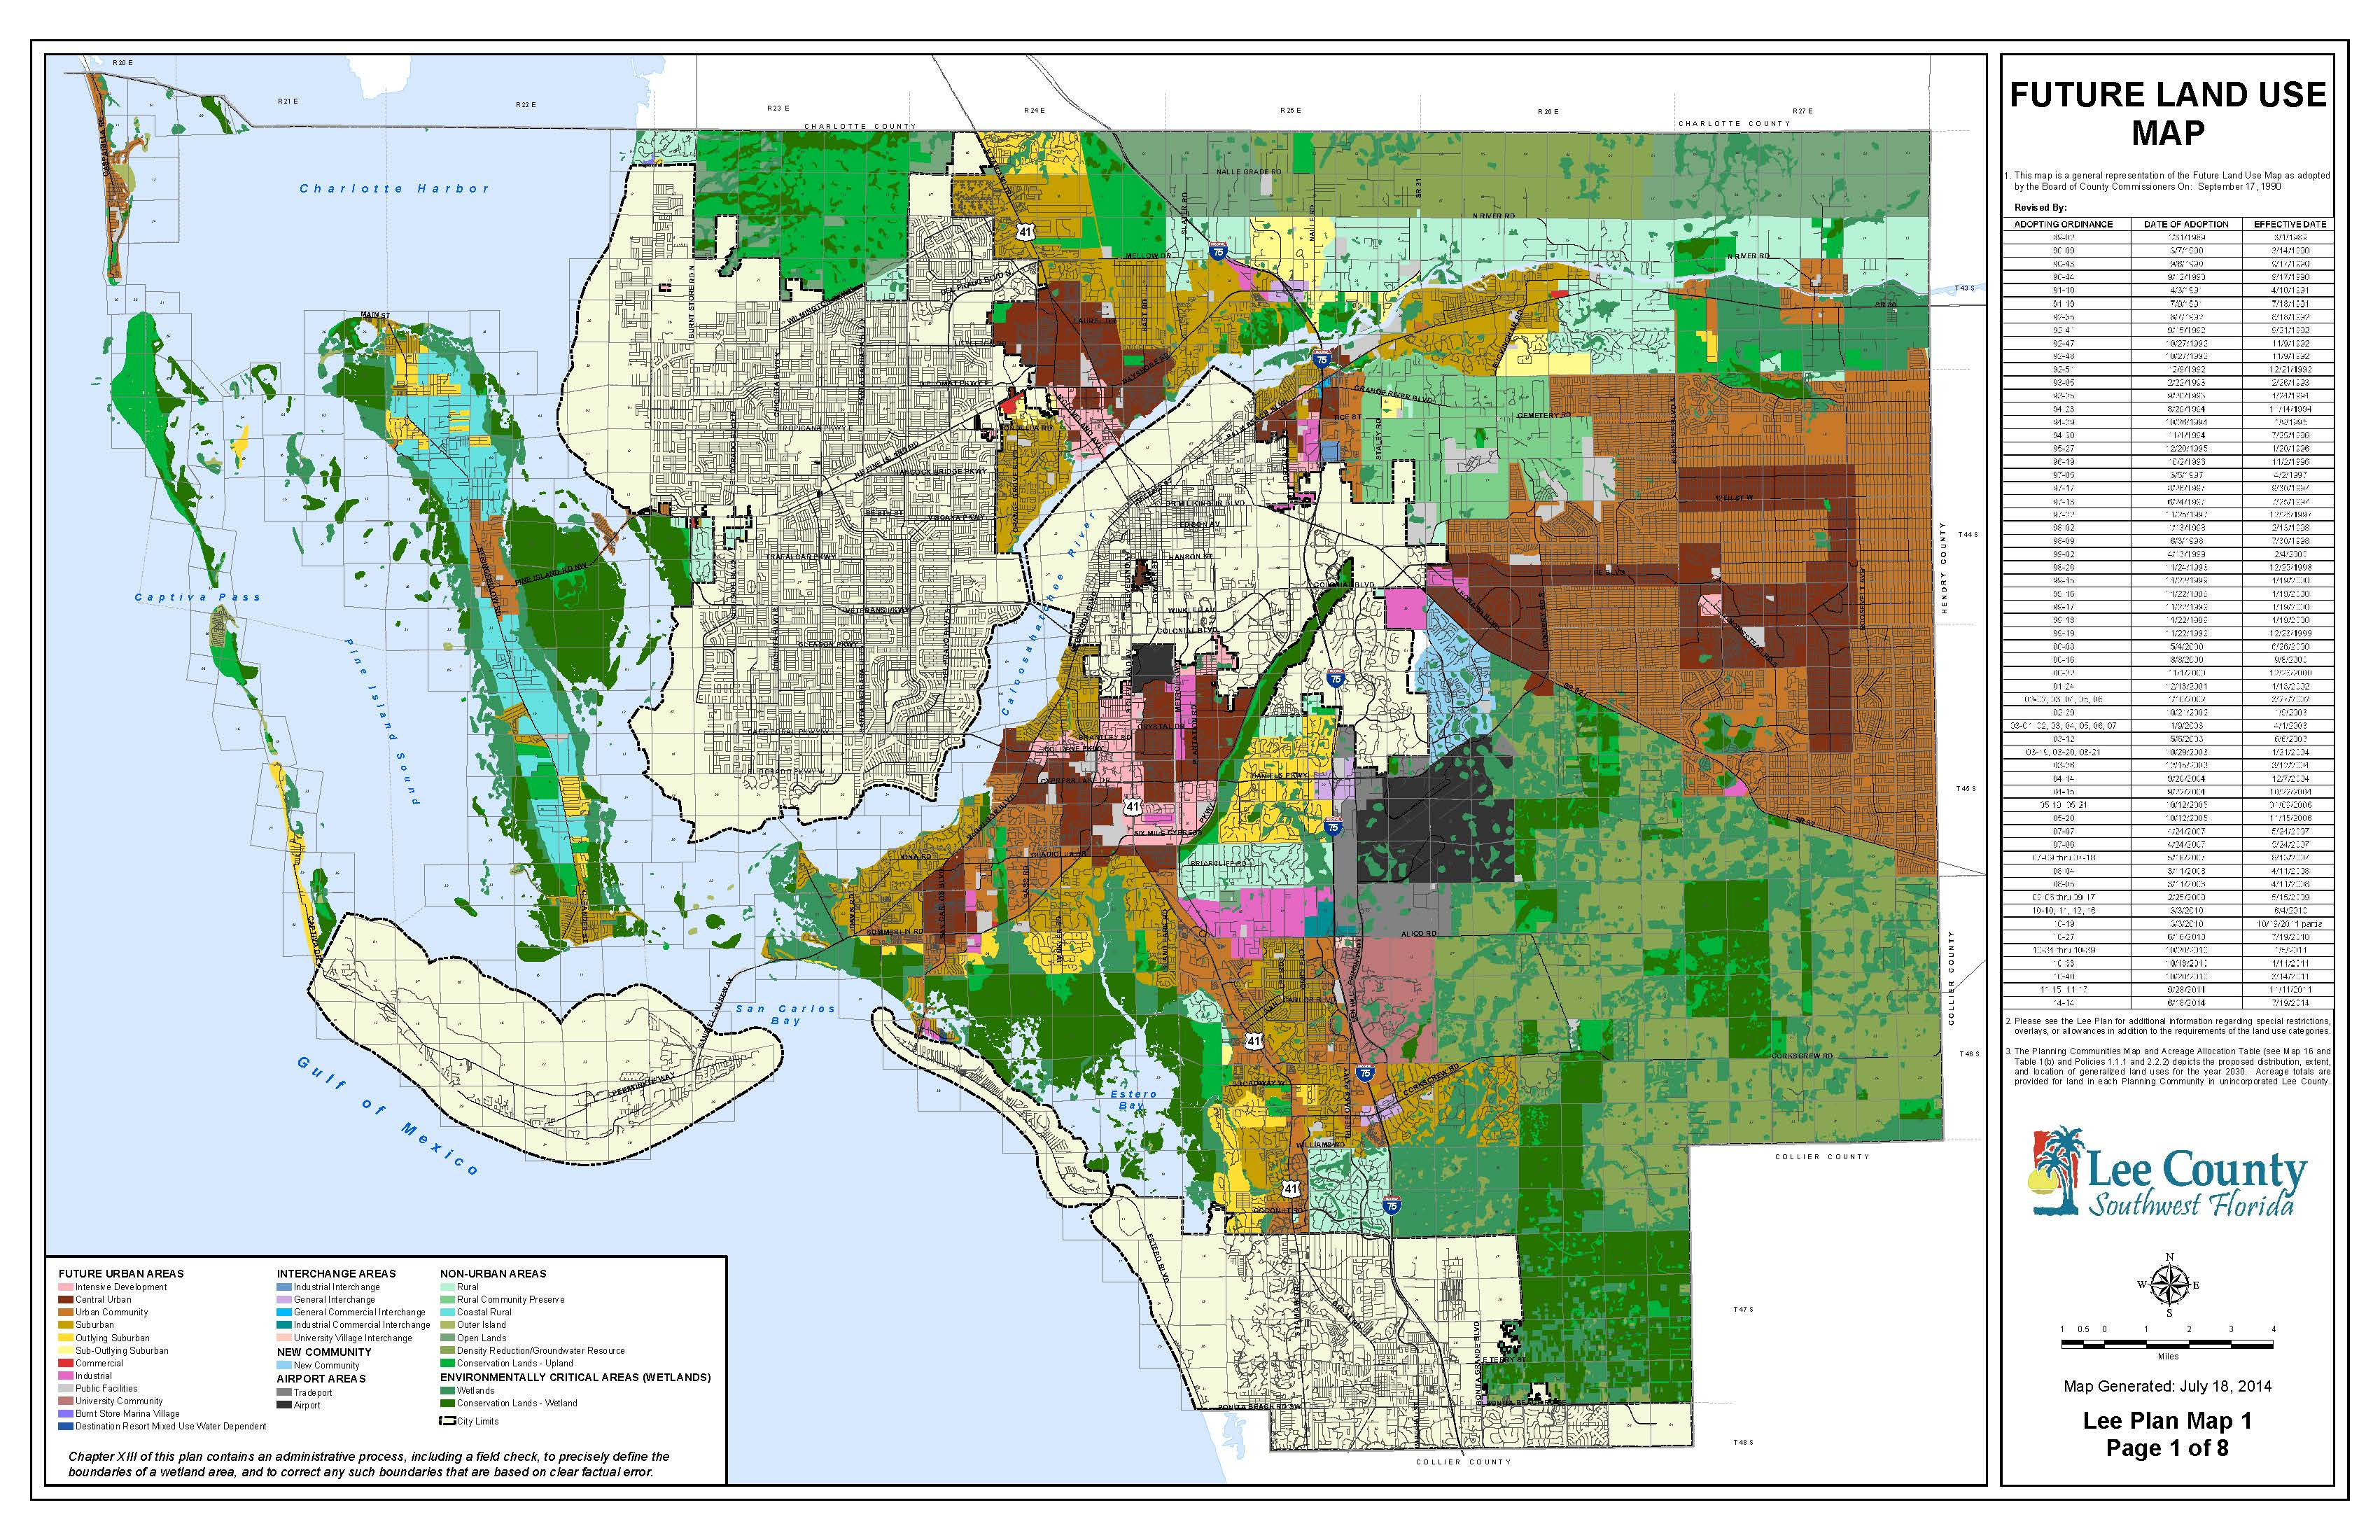 The Future Land Use Map - Florida Wetlands Map